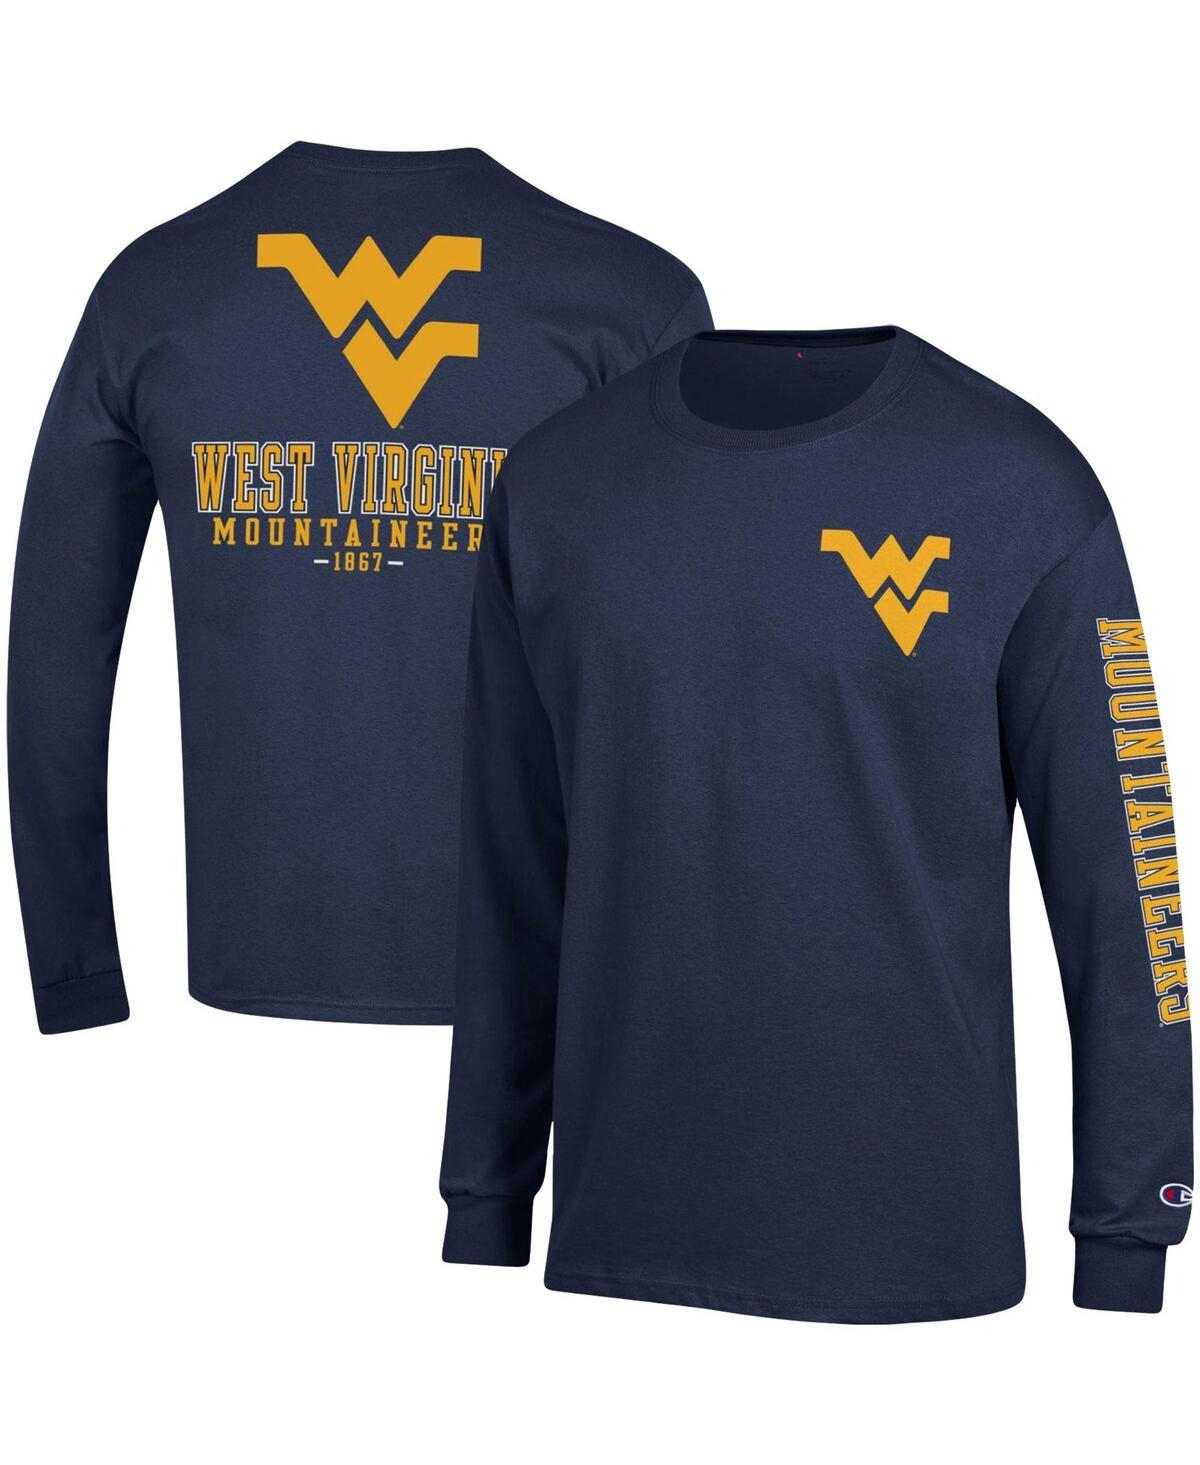 Champion Men's Navy West Virginia Mountaineers Team Stack Long Sleeve T-shirt